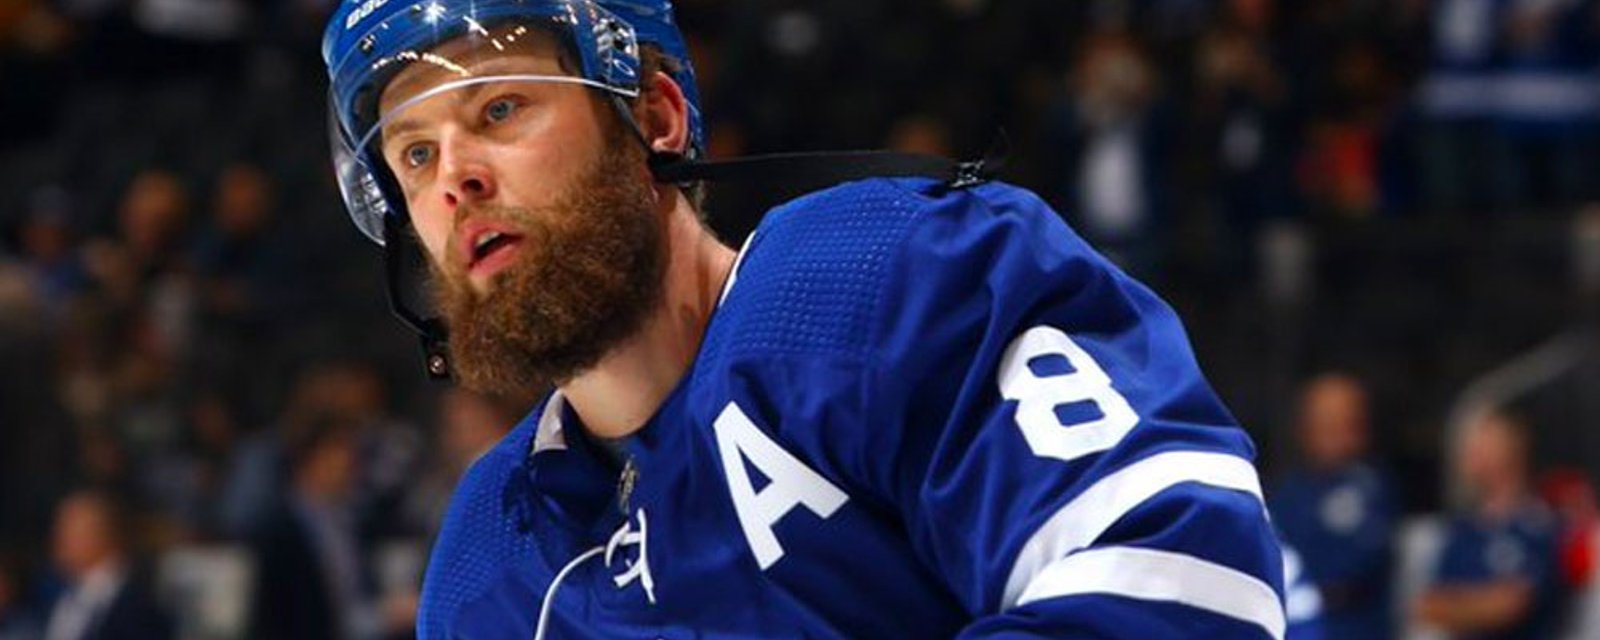 Muzzin injury changes Leafs’ trade plans